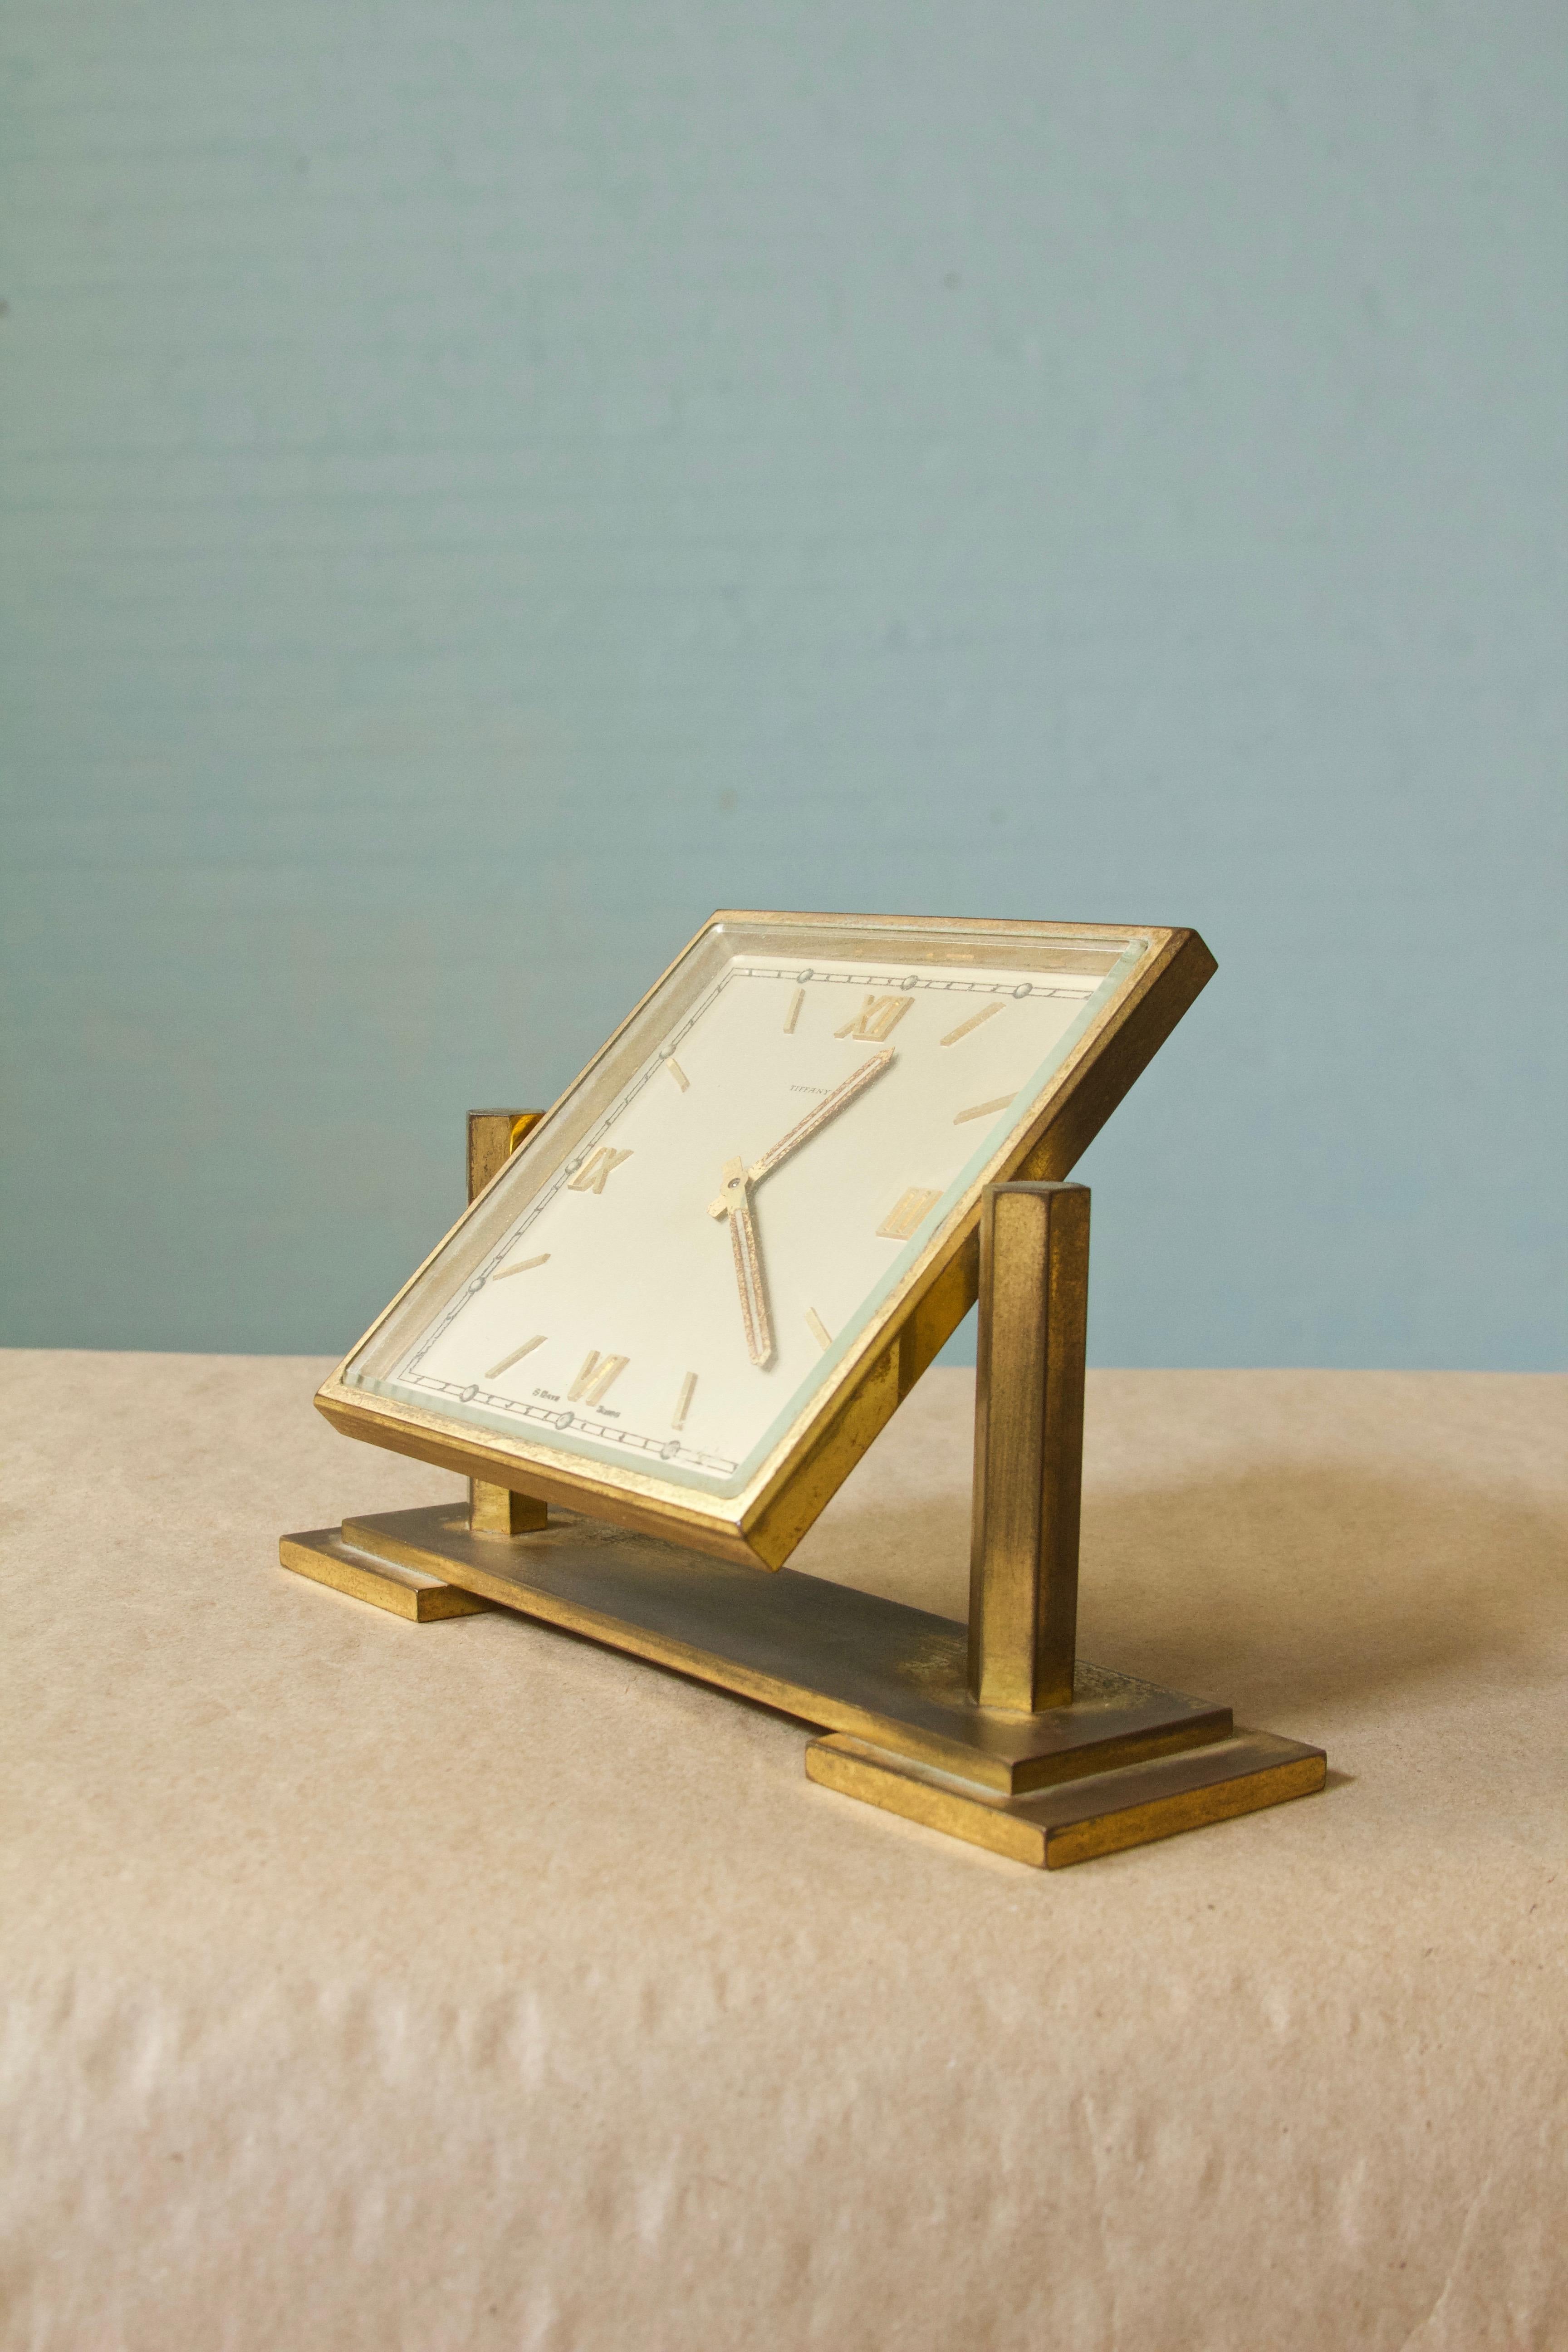 American Vintage Tiffany and Co. Square Brass Desk Clock, 1970s For Sale